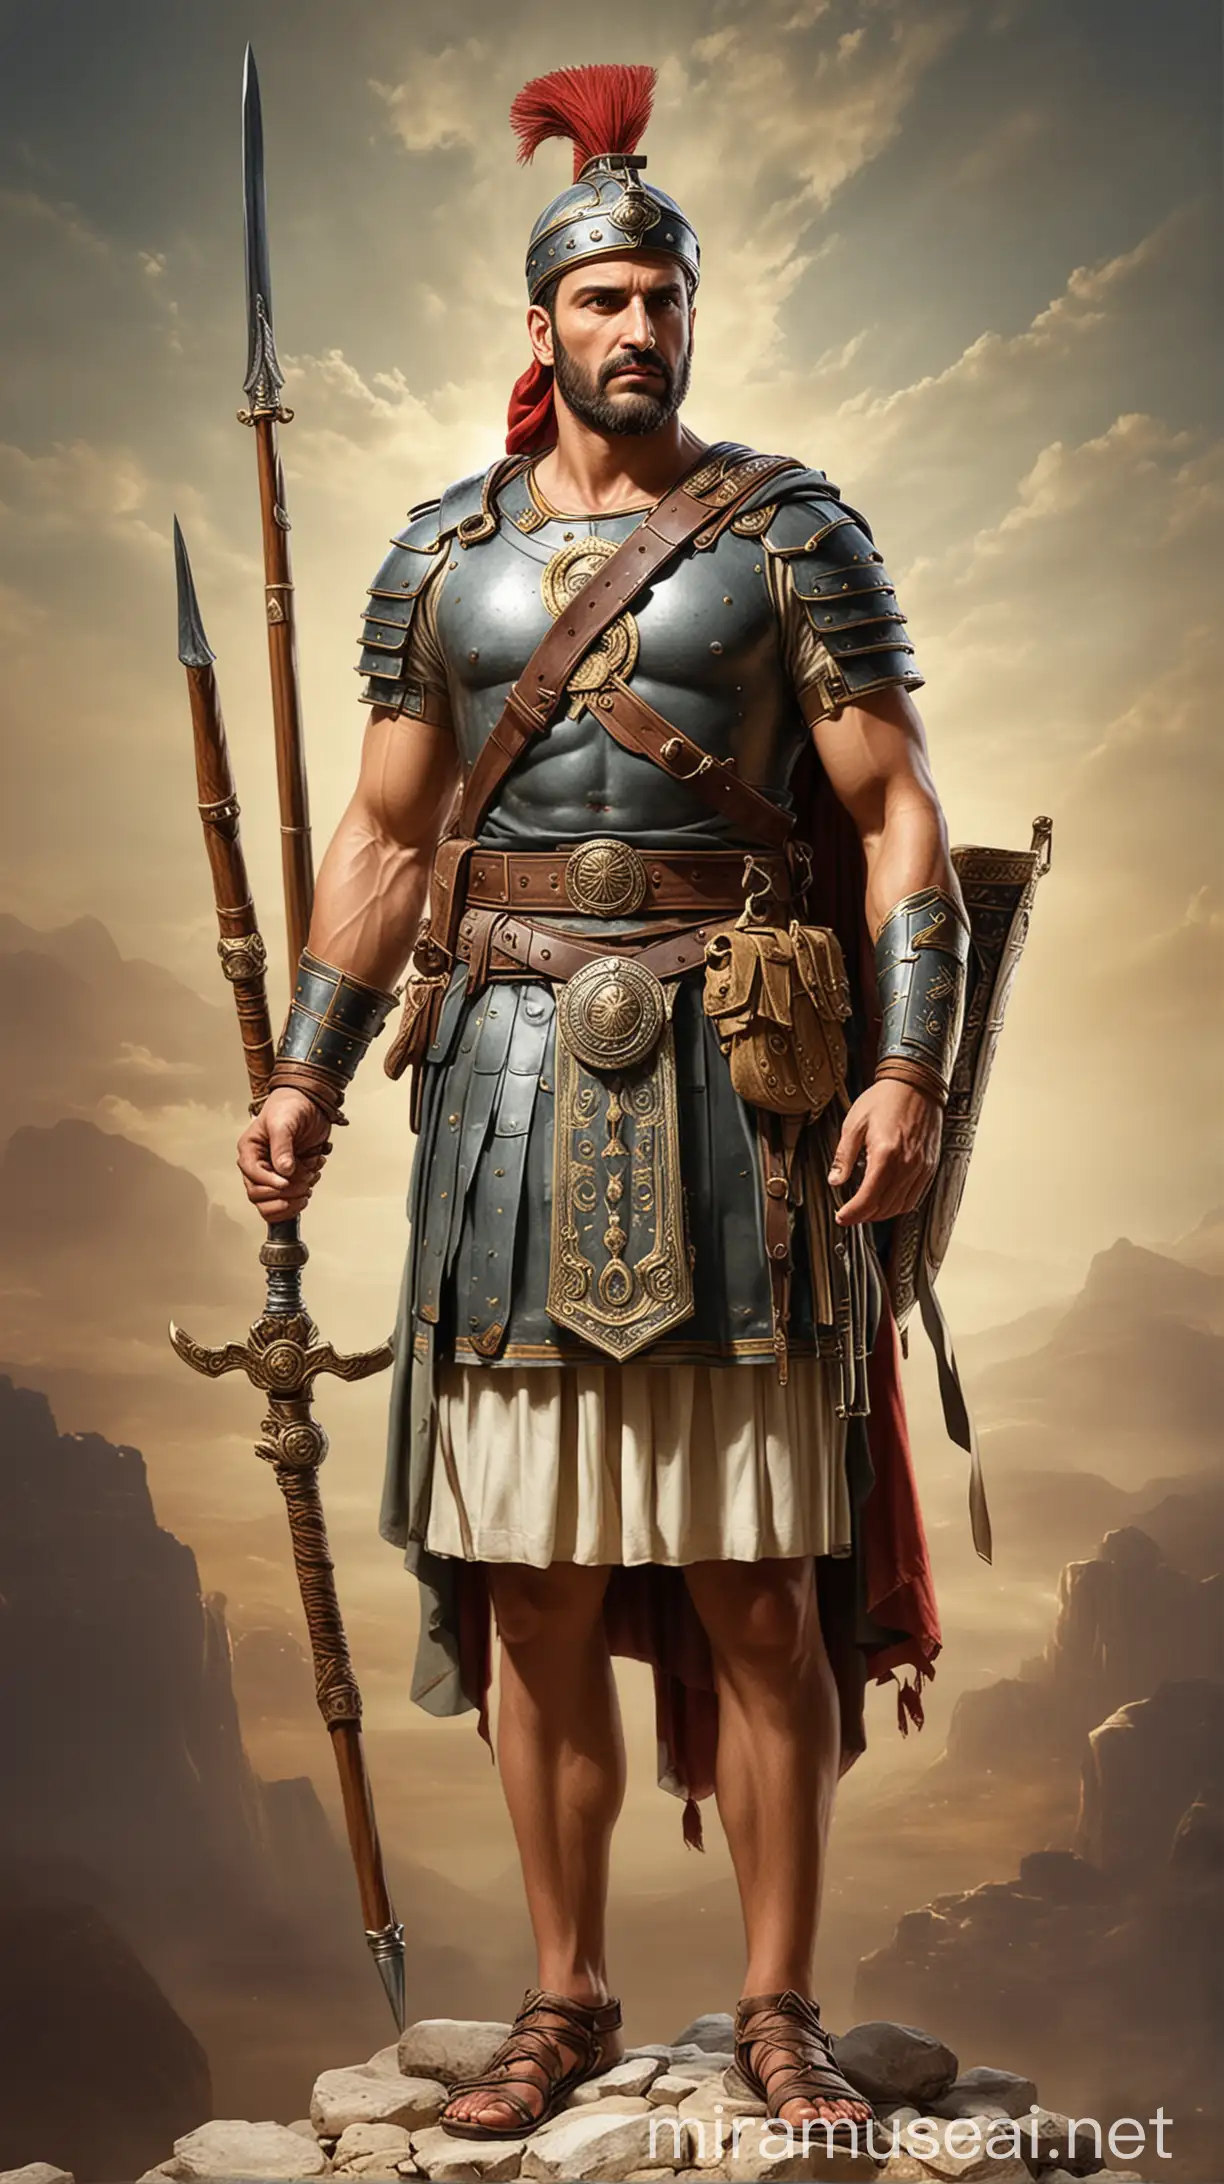 Leader of army in ancient world 